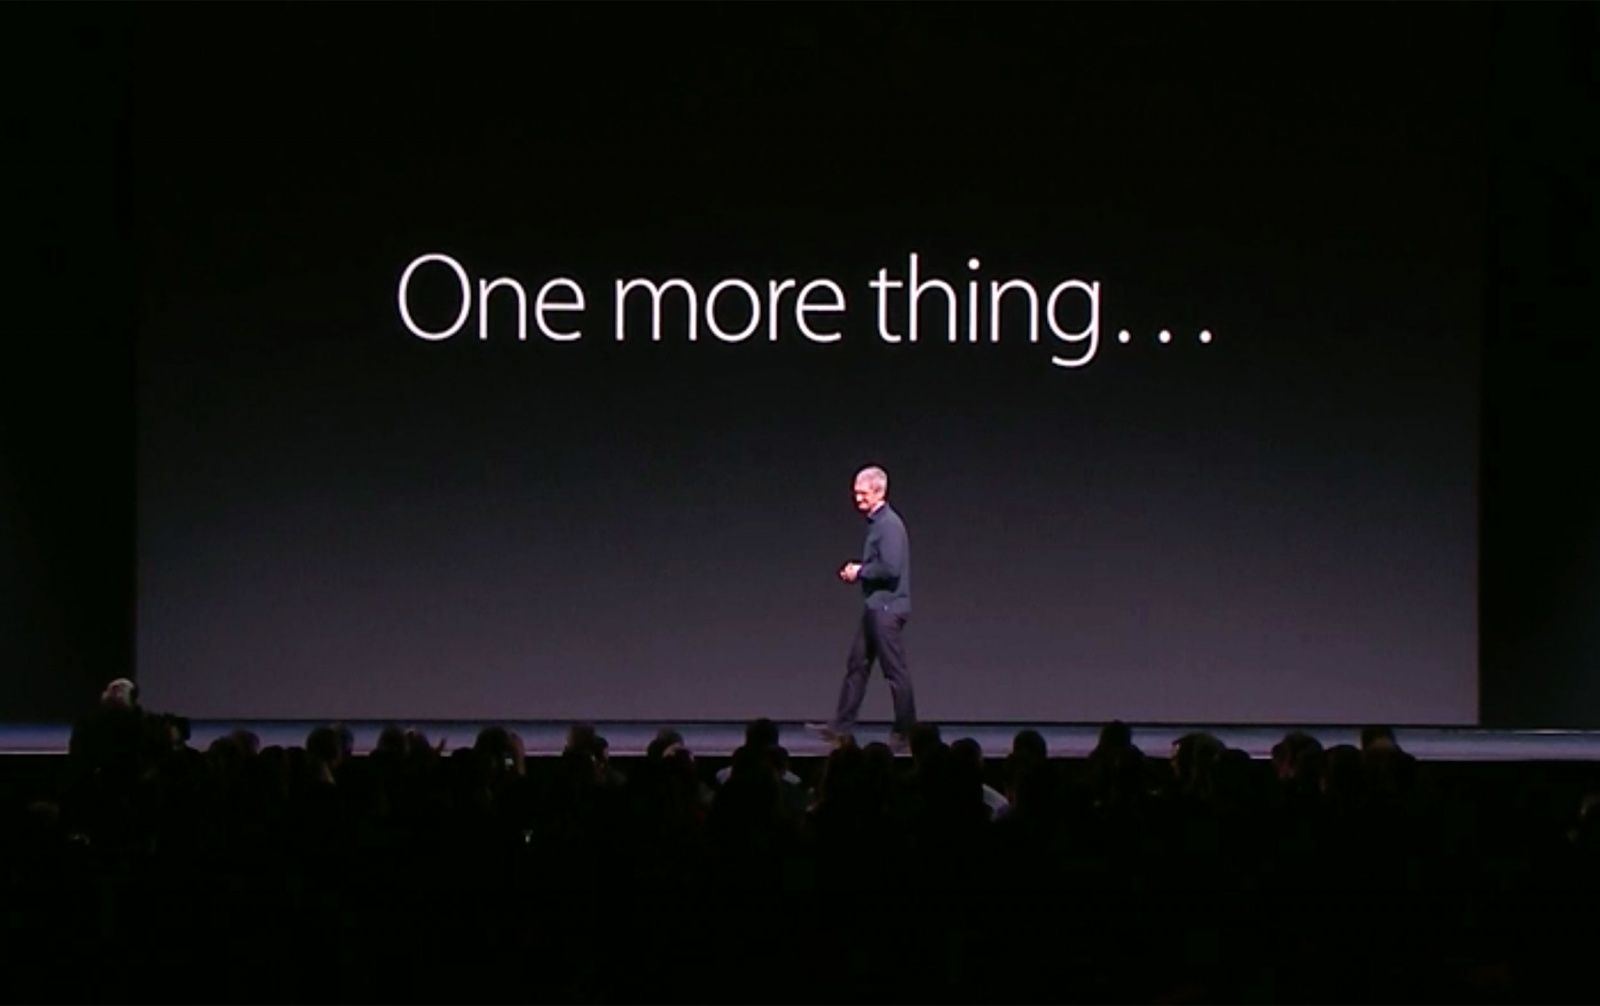 Tim Cook com "One more thing…"